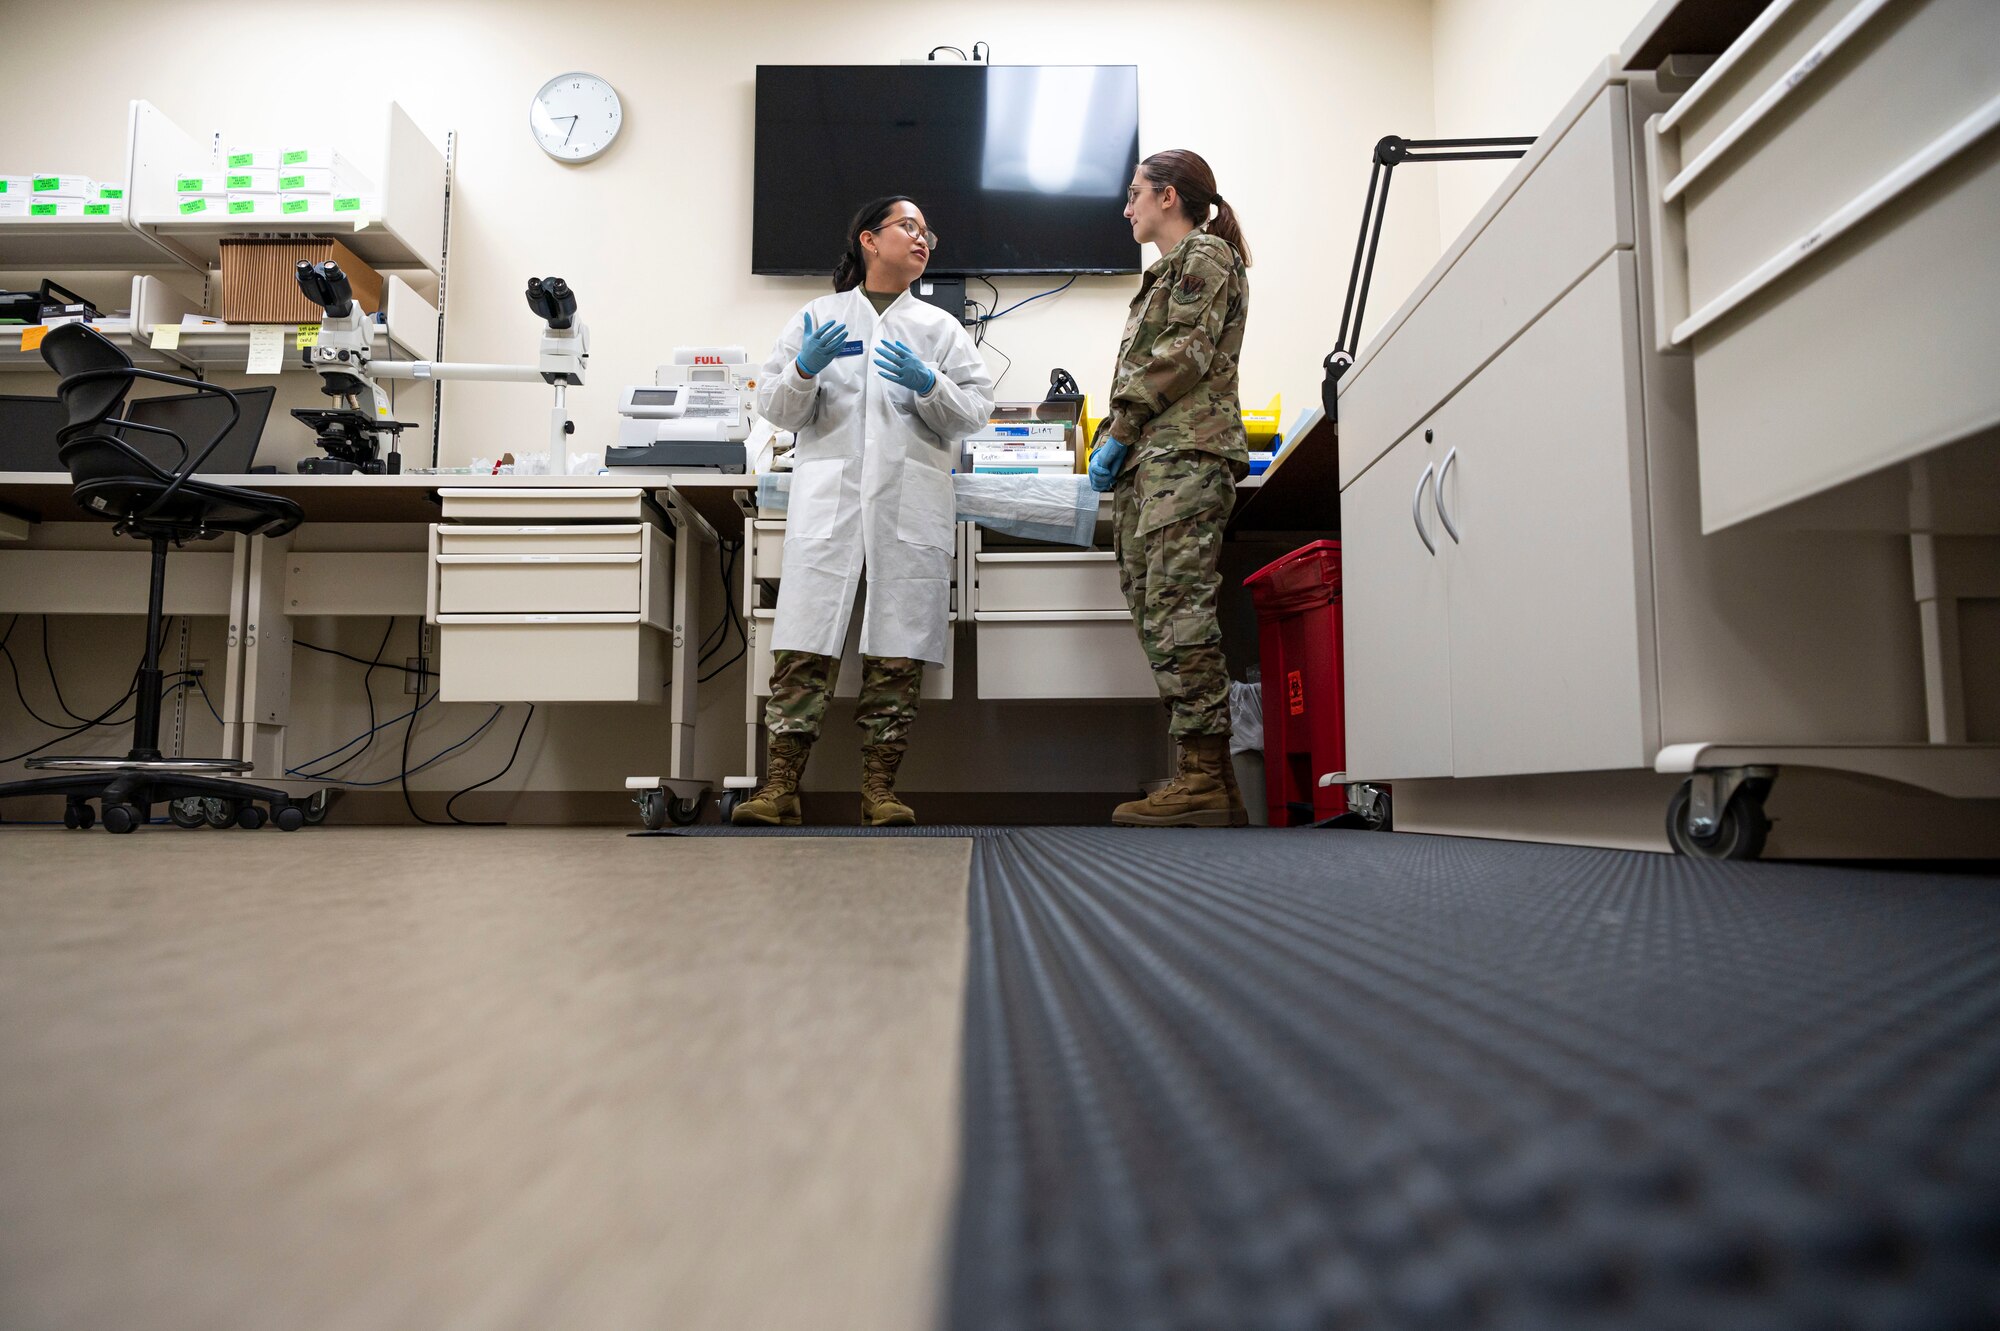 U.S. Air Force Senior Airman Apple Alterado, 20th Healthcare Operations Squadron (HCOS) medical laboratory technician, left, gives a tour of the urology lab to Airman 1st Class Hannah Trent, 20th Operational Medical Readiness Squadron aerospace medical services technician, during Lab Week at Shaw Air Force Base, S.C., April 26, 2023. The 20th HCOS provides urology services to monitor the health of Team Shaw so that they can remain ready to fly, fight and win. (U.S. Air Force photo by Senior Airman Isaac Nicholson)